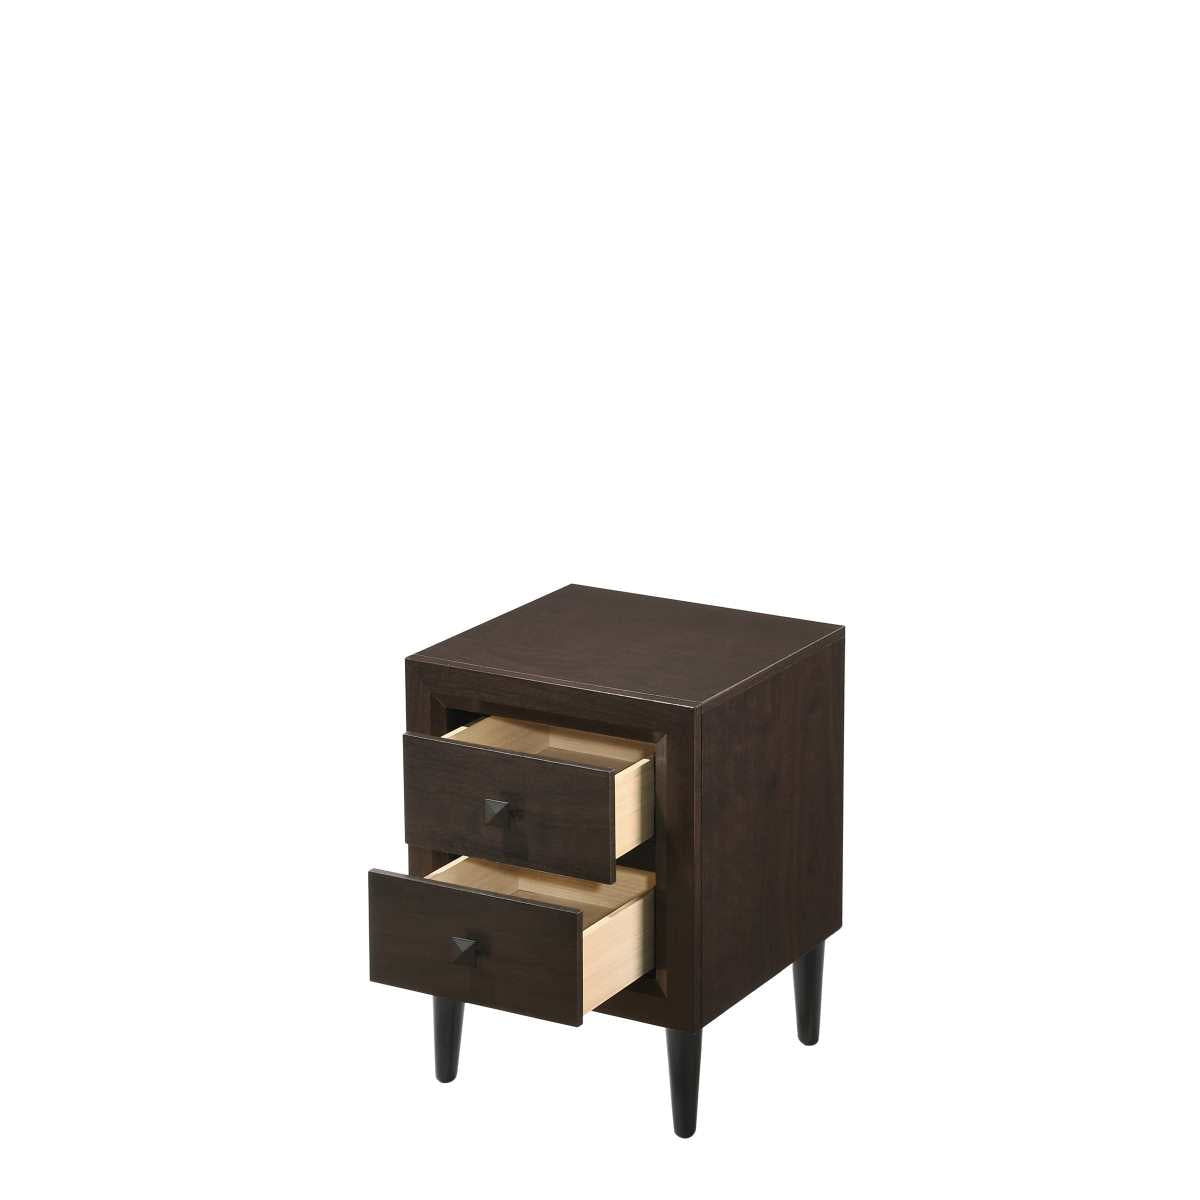 Pritti Nightstand with Two Drawers Espresso